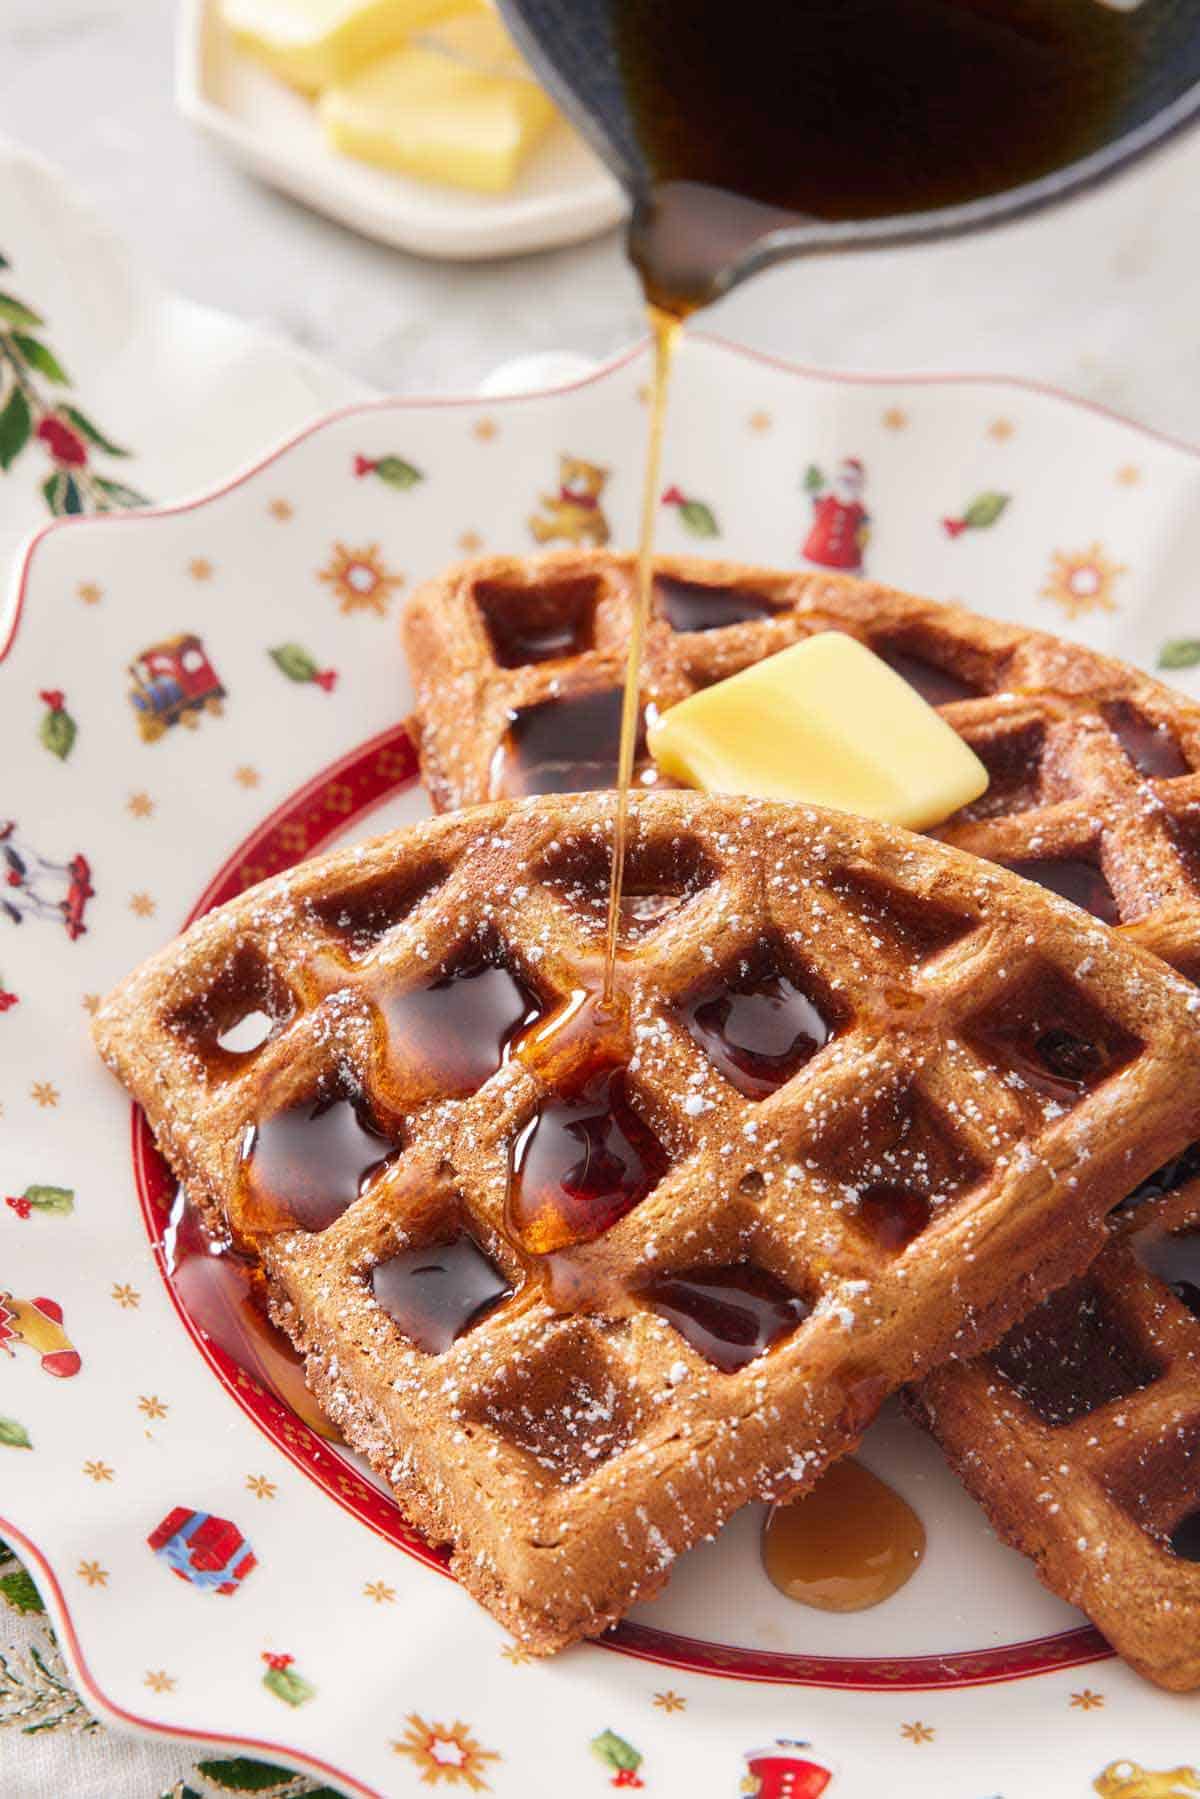 Syrup poured over gingerbread waffles on a plate.